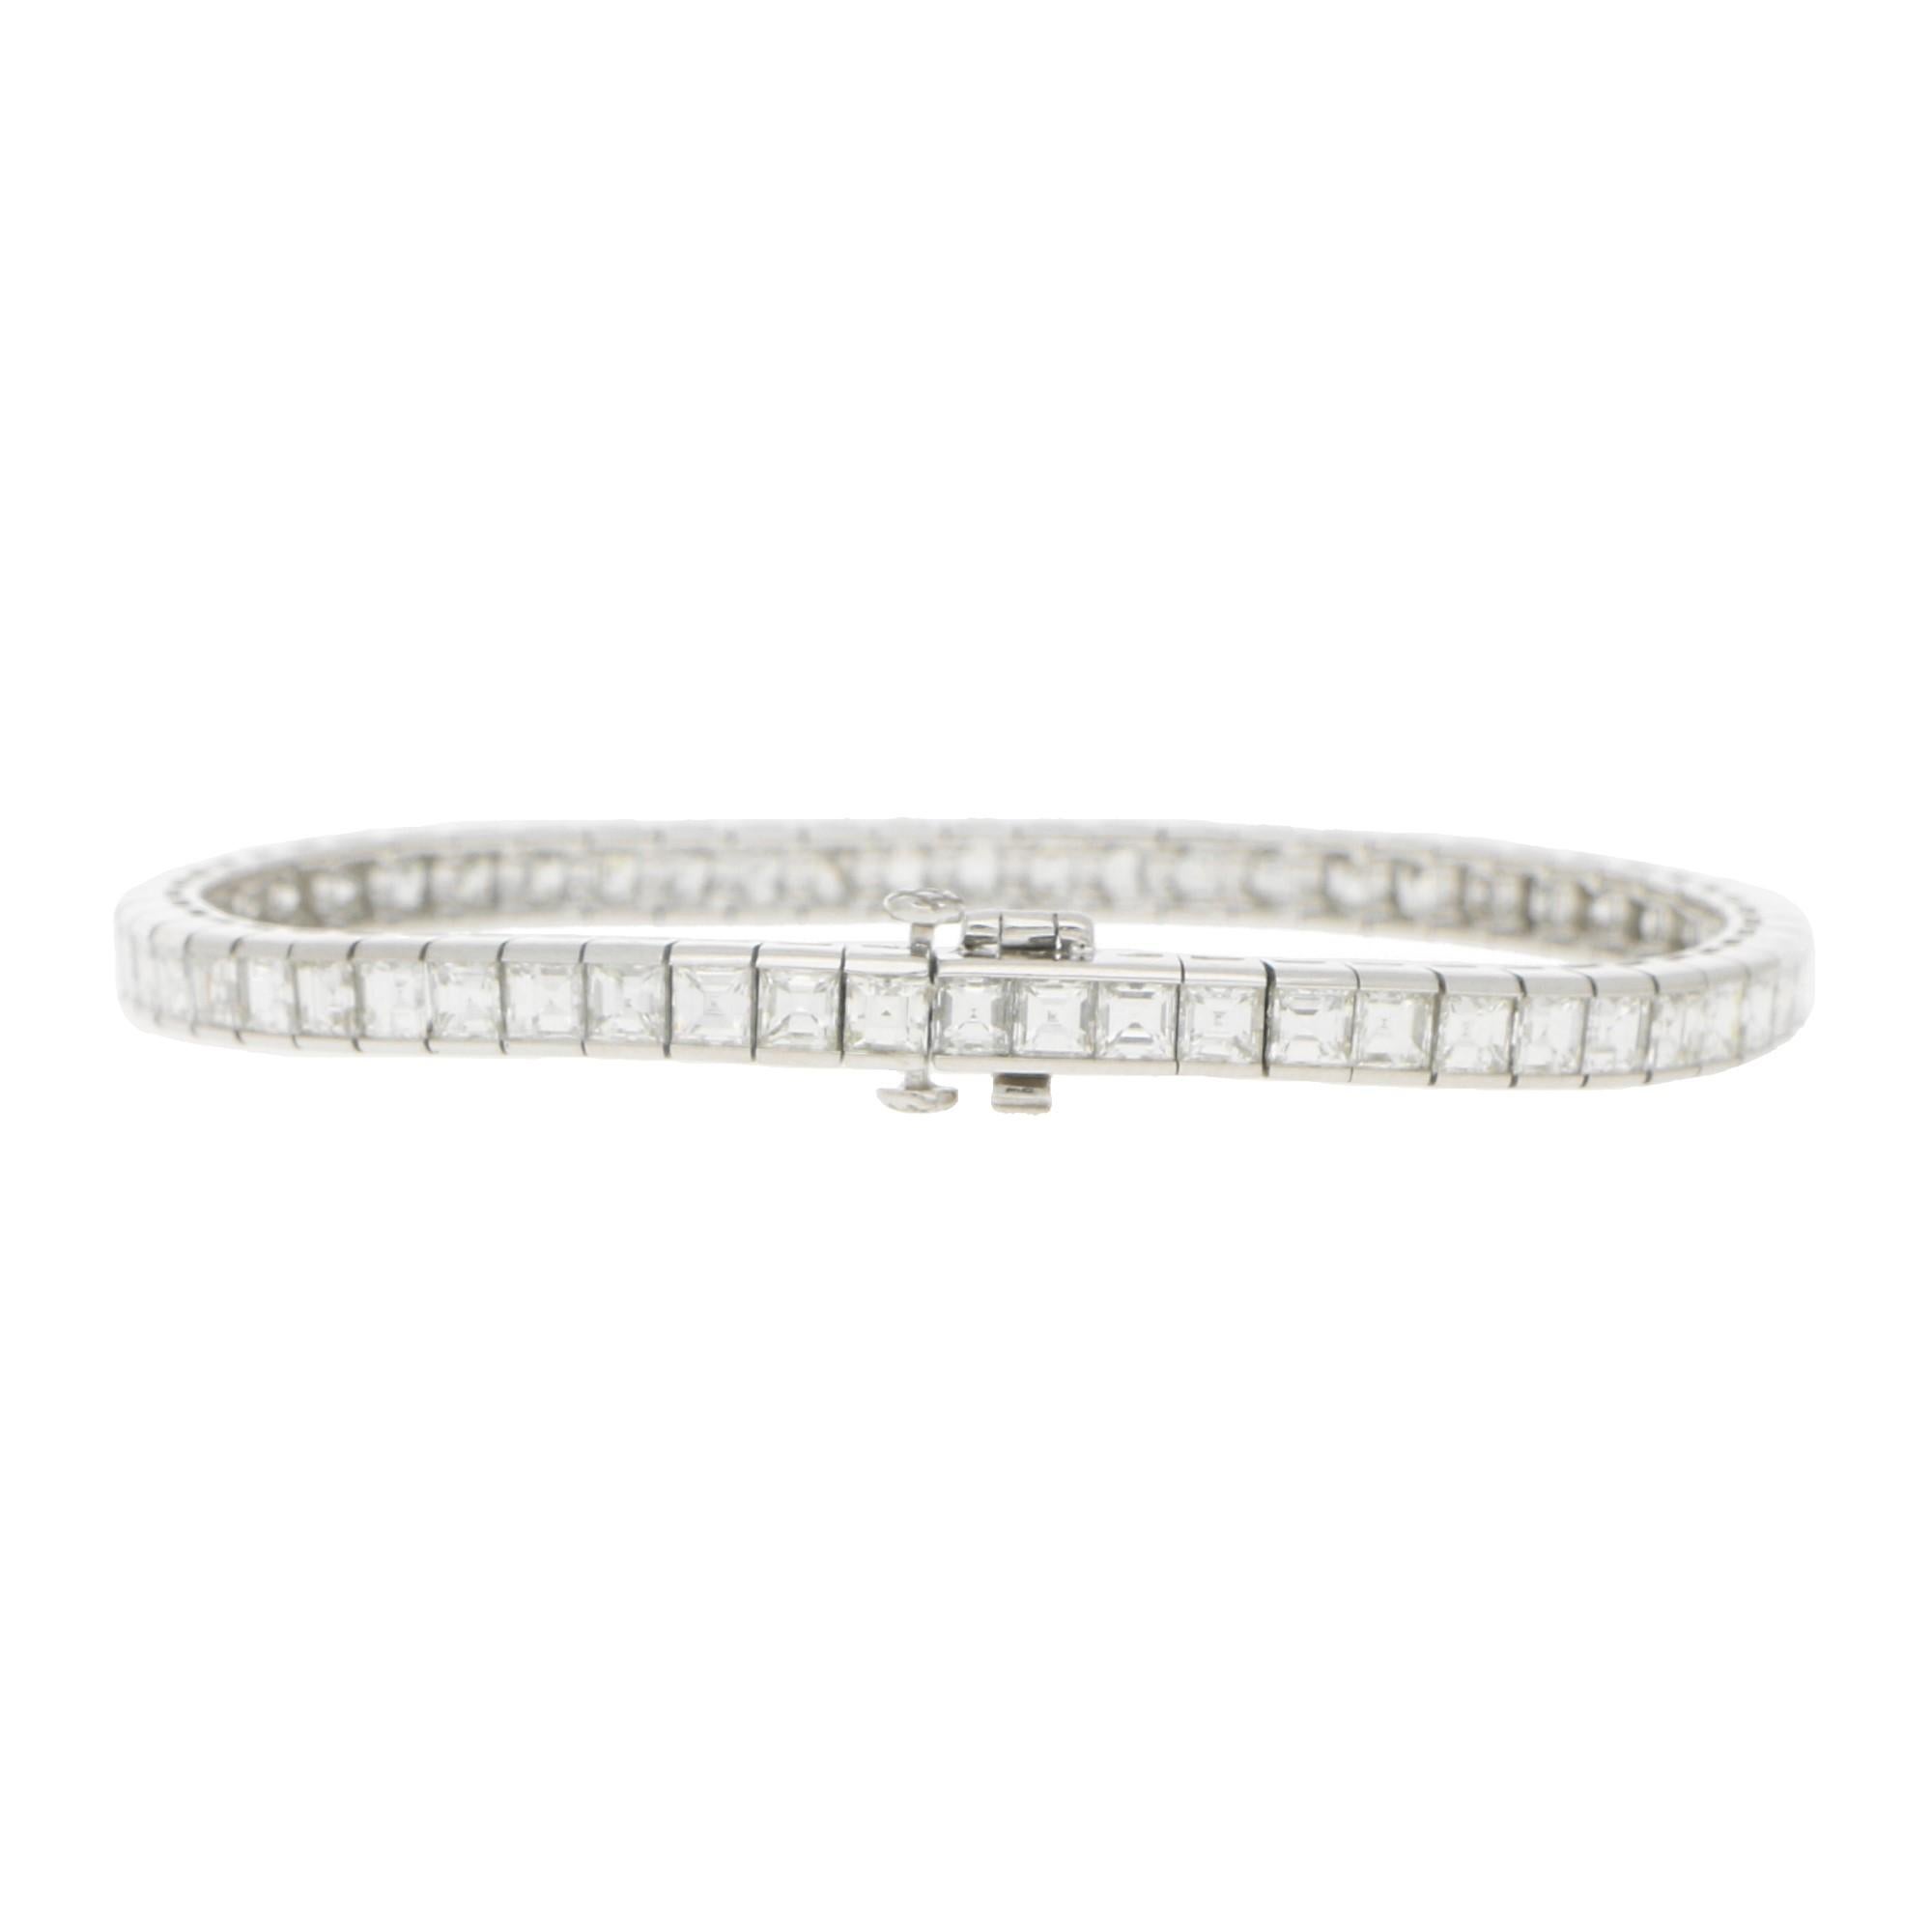 An elegant princess cut diamond line bracelet set in platinum. 

This is a beautiful example of a modern take on the traditional line bracelet and is composed with exactly 58 princess cut diamonds. Each diamond is set in a rub-over articulated